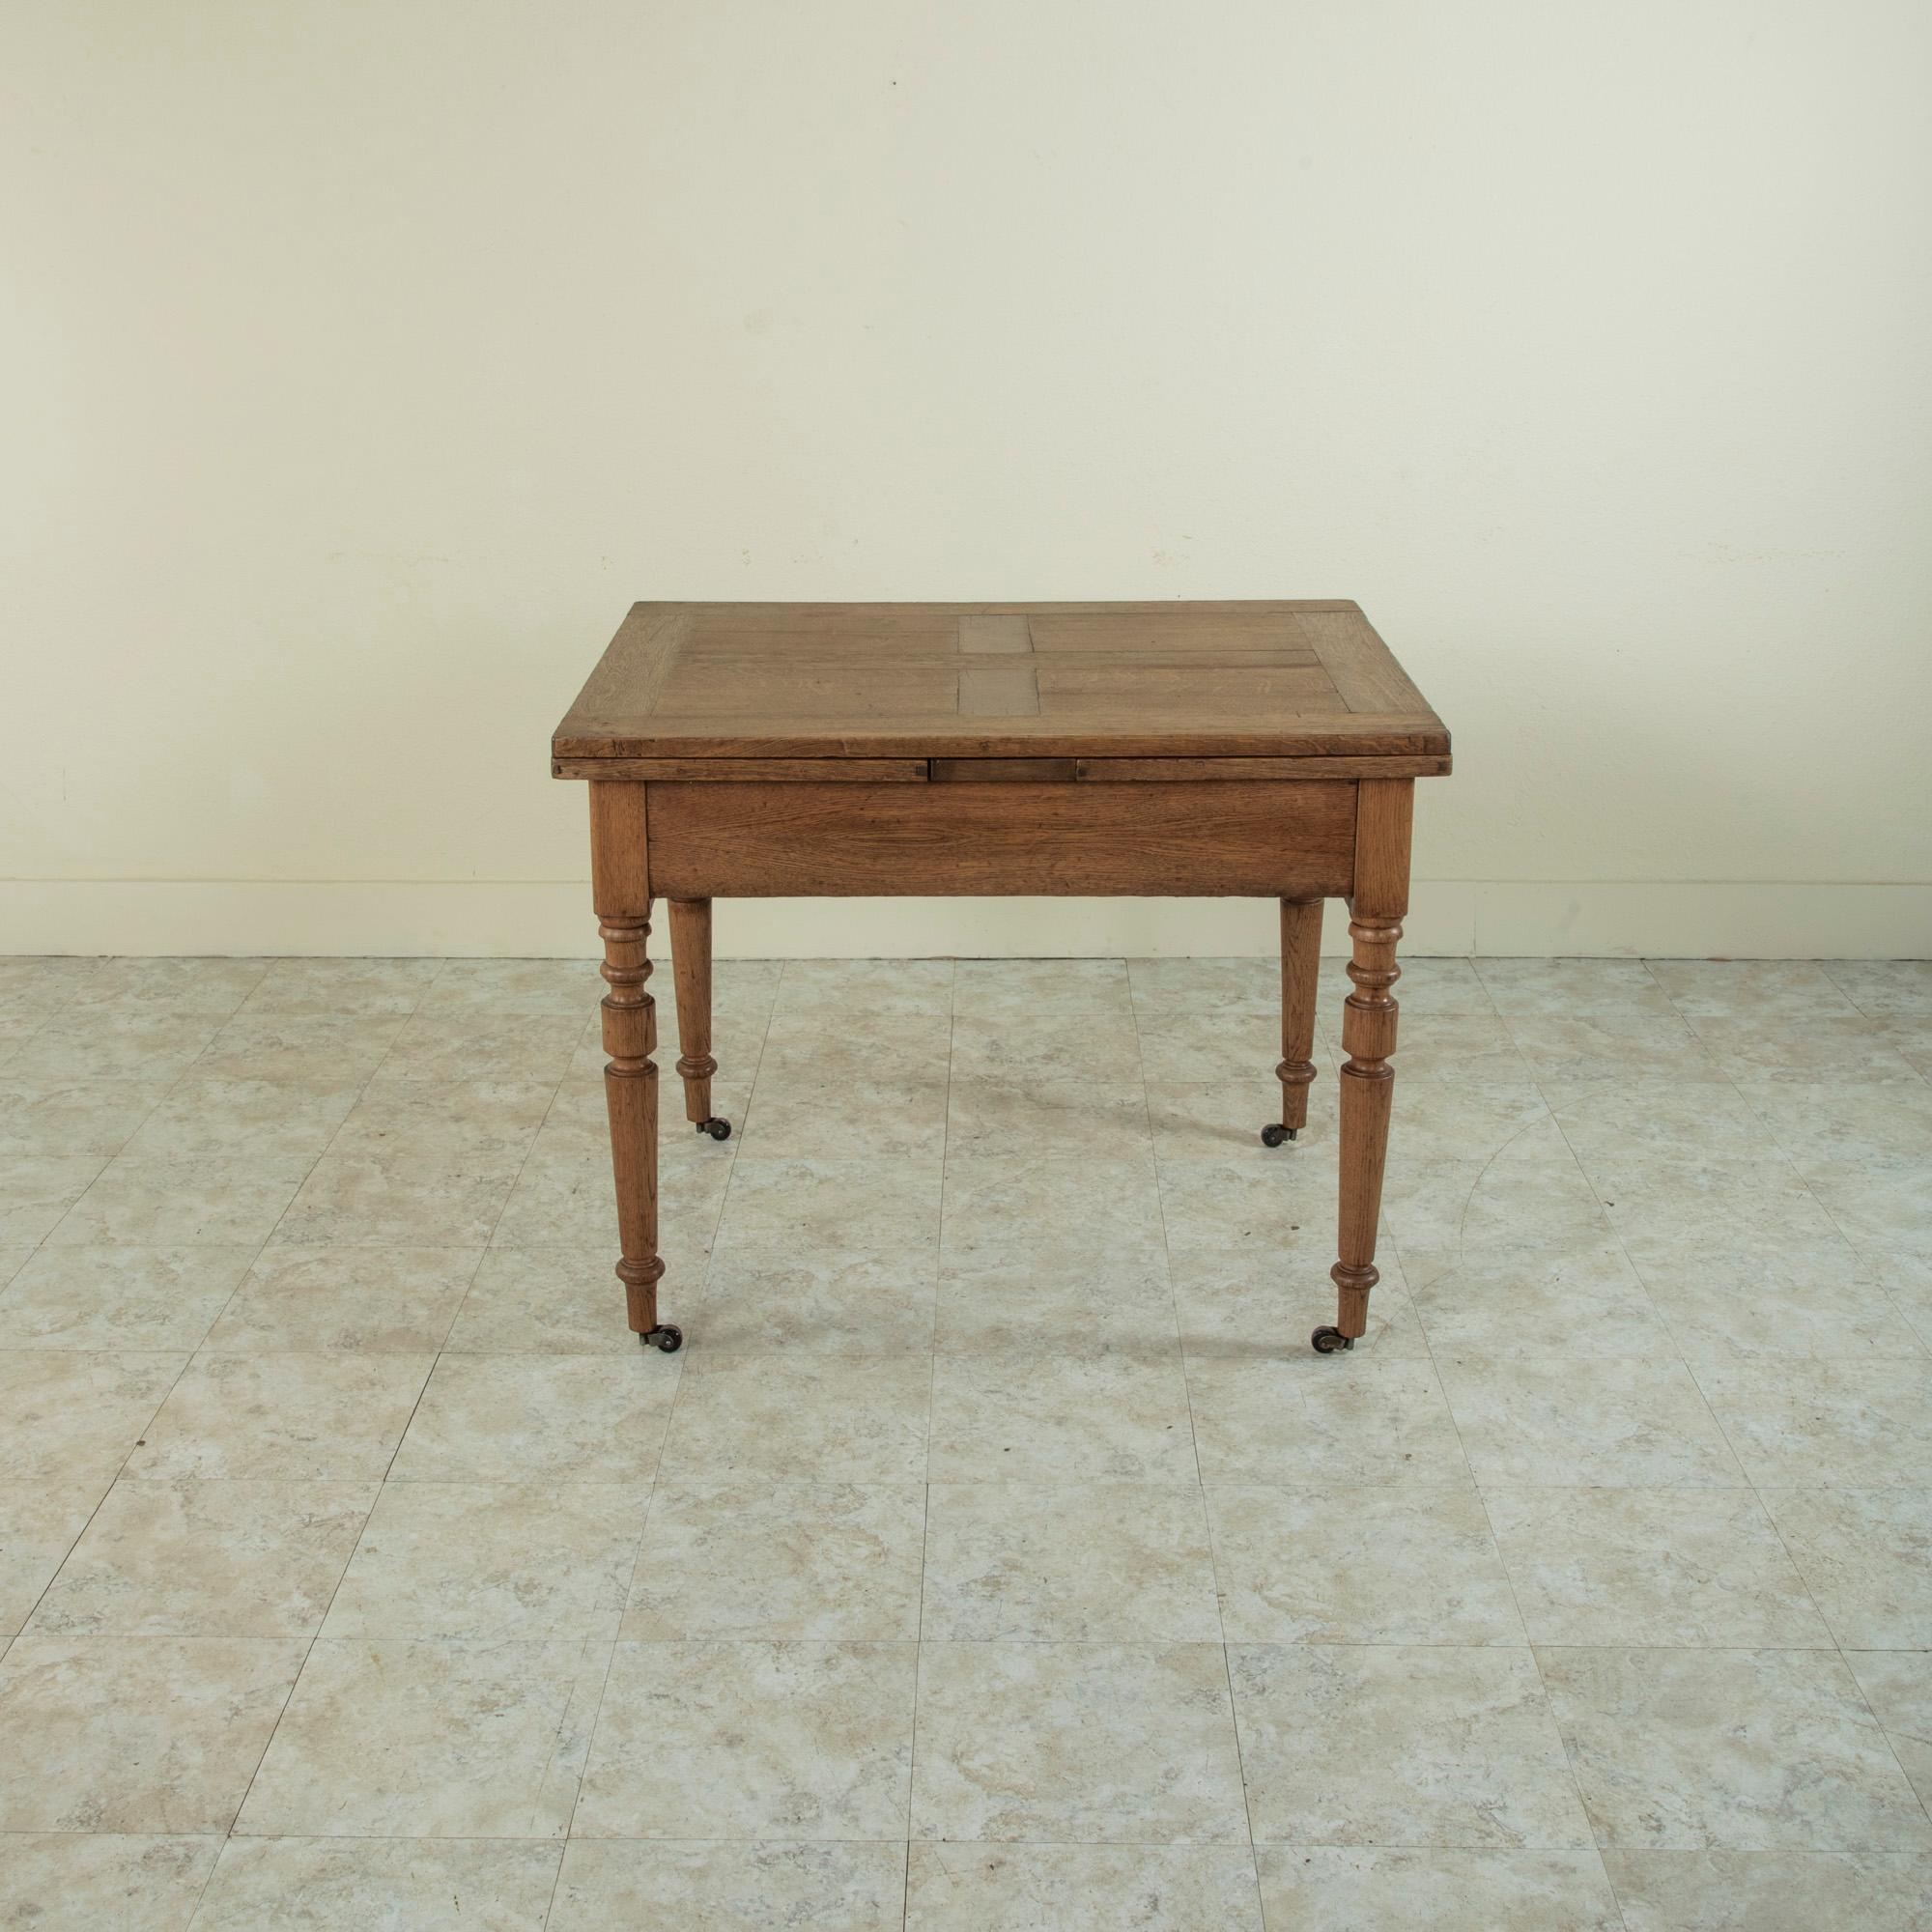 This late nineteenth century French oak farm table features a parquet top and turned legs. Two pull out leaves extend the length of the table from 40 inches to 74 inches with both leaves out. Each leaf measures 17 inches long. A single drawer of